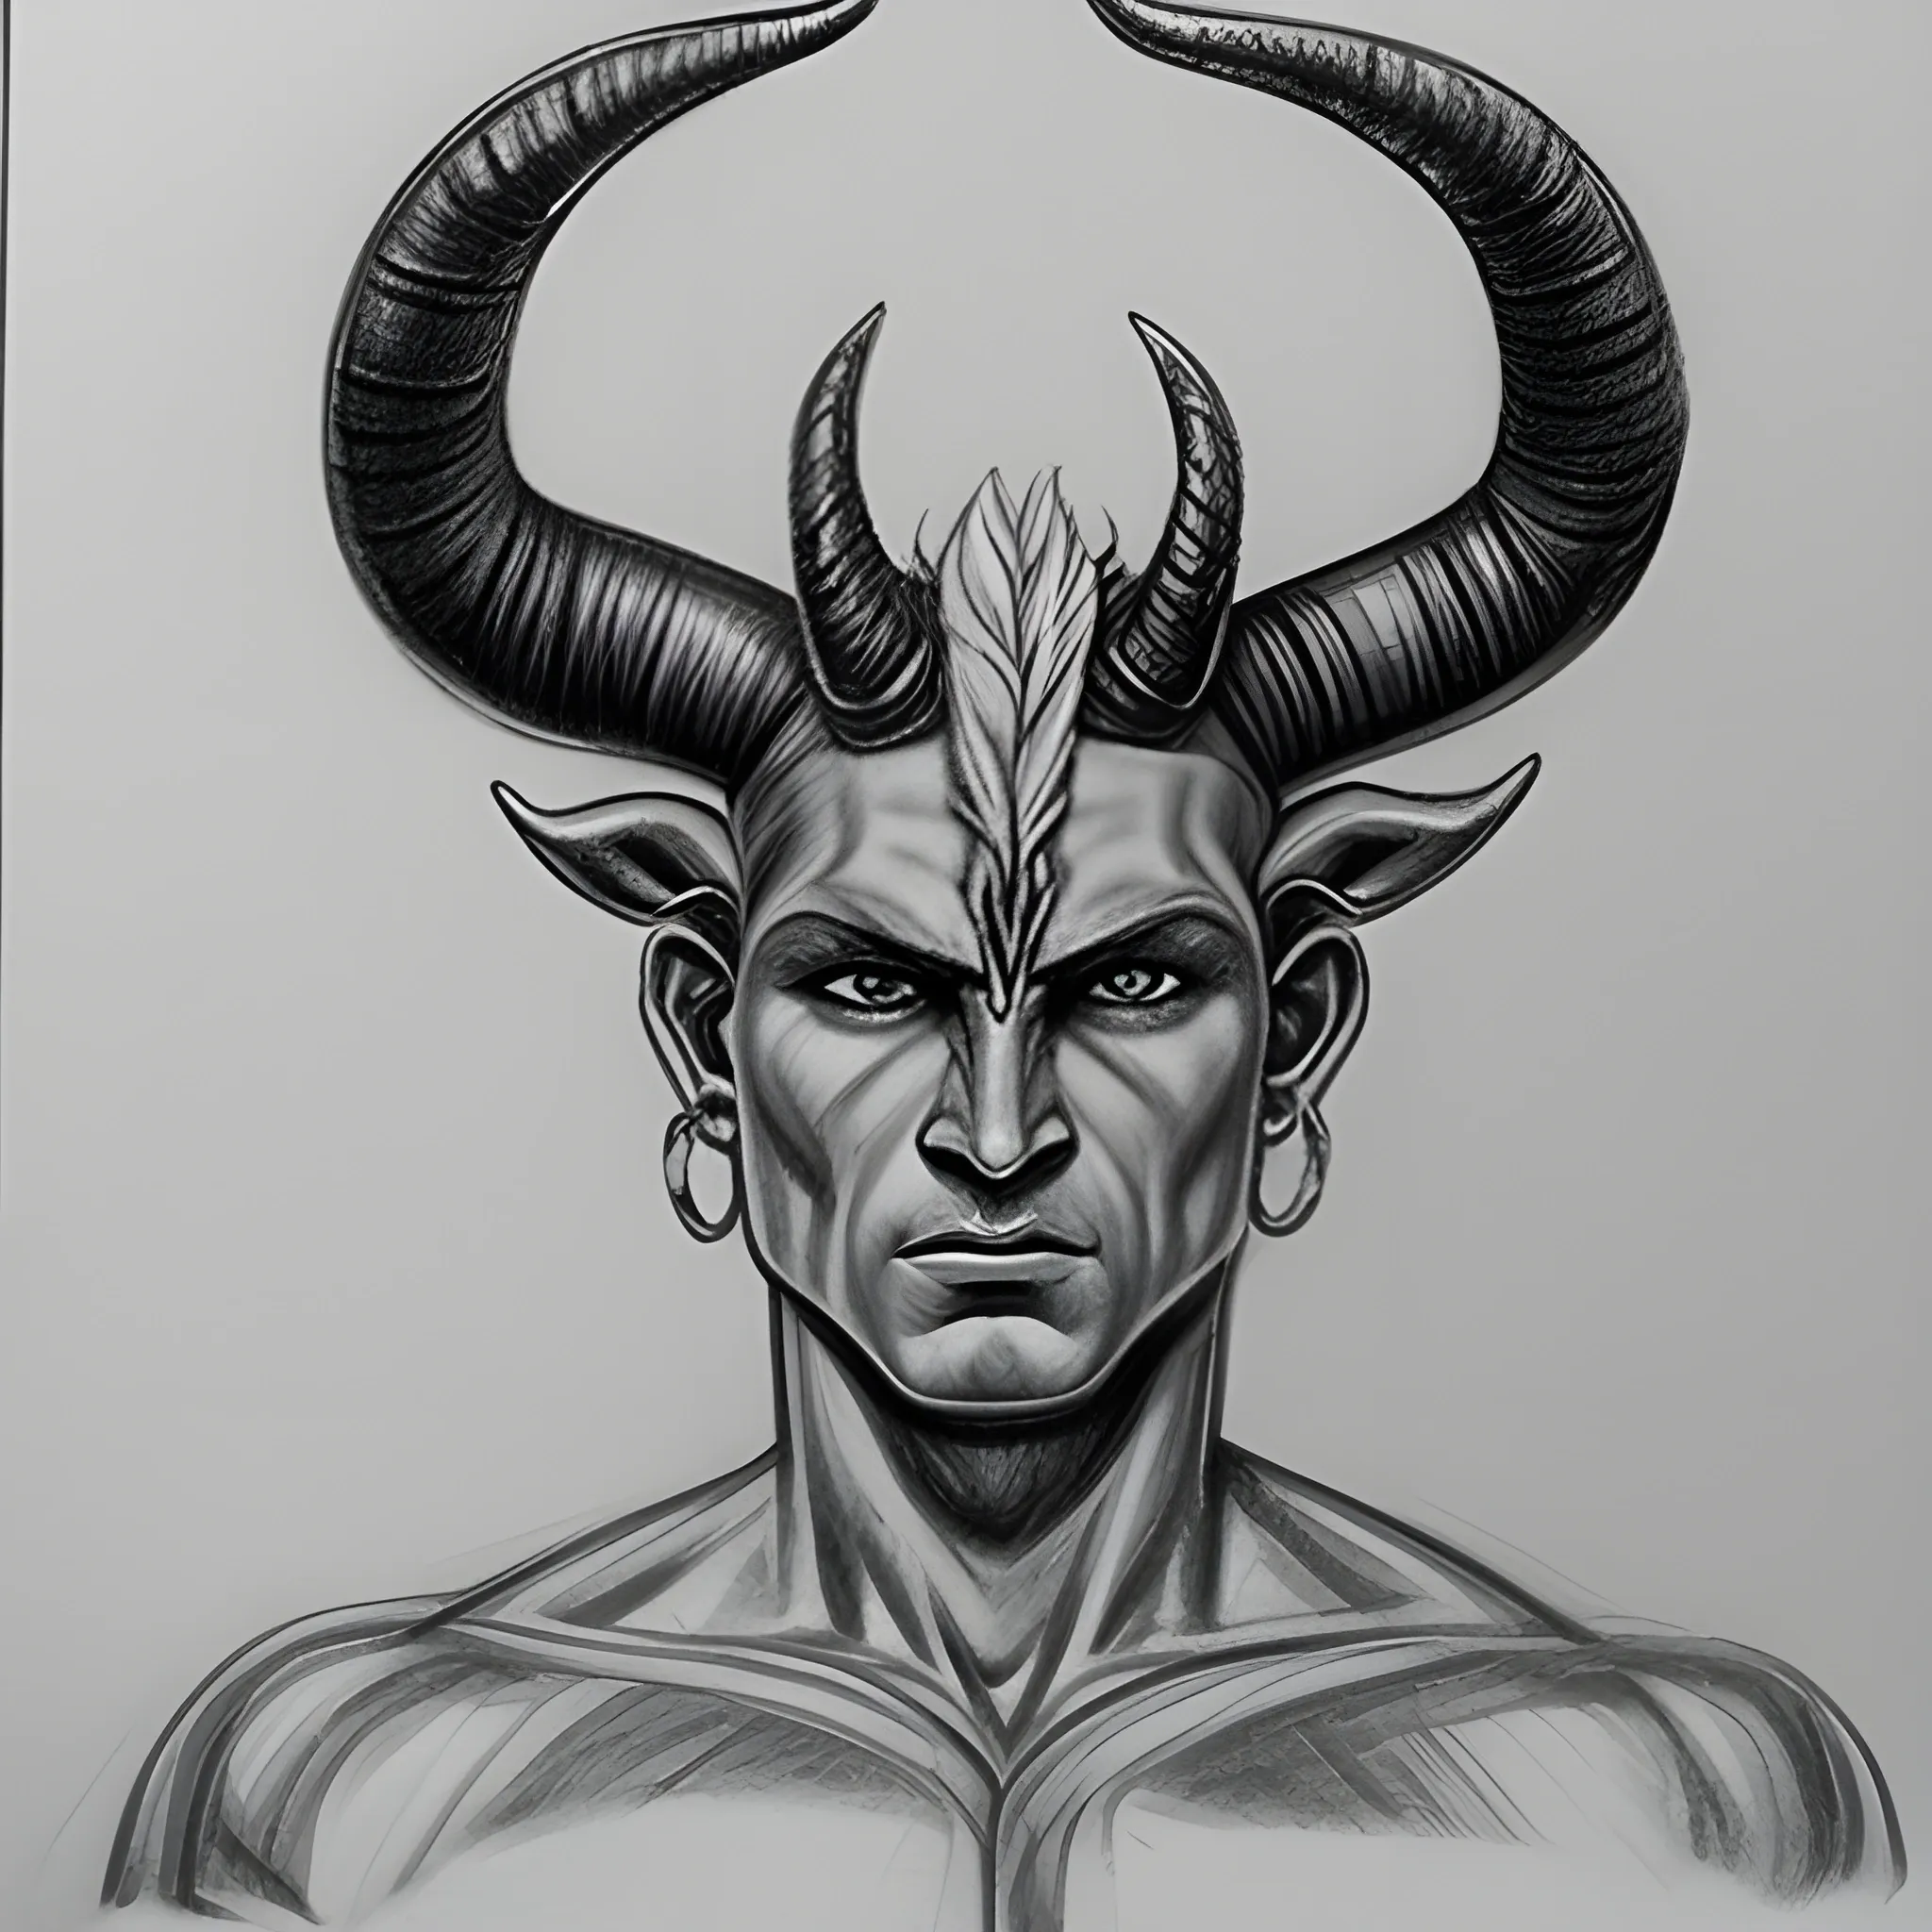 tanned skinned demi-god with horns with a kitchen knife.
, Pencil Sketch